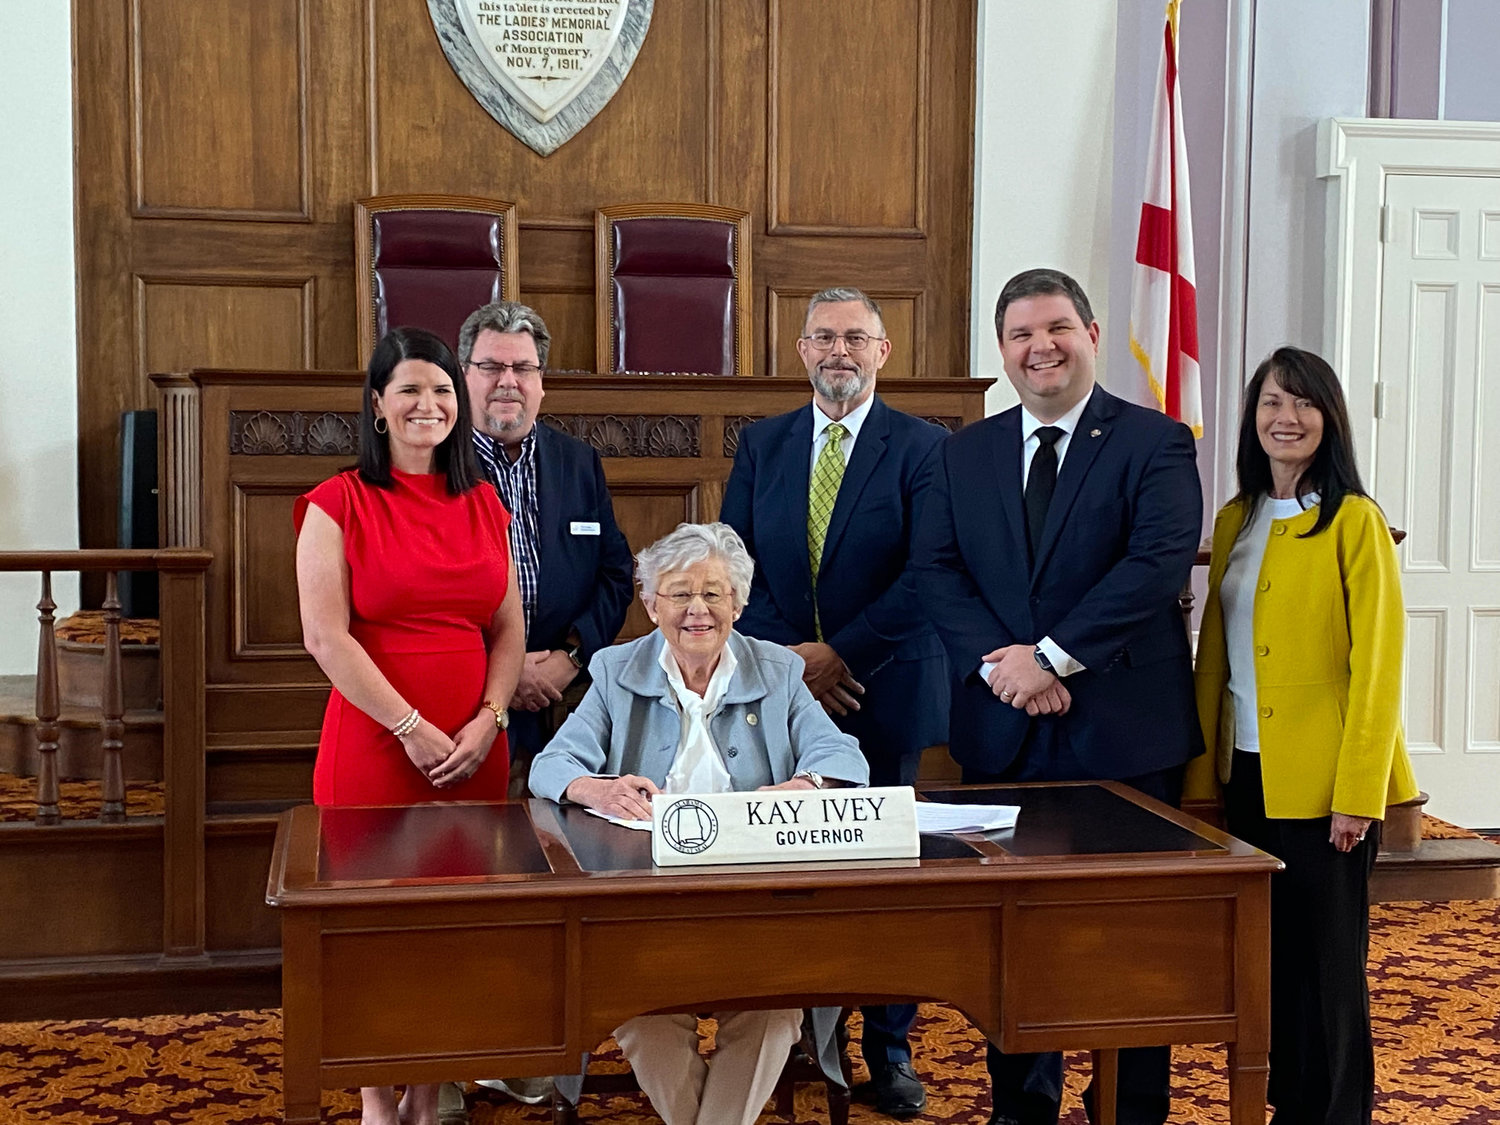 Rep. Matt Simpson (second from right) watched Alabama Governor Kay Ivey sign House Bill 68 this week. The legislation offers extra protections to victims of violent crimes who are developmentally and intellectually disabled. Attending the signing were Assistant District Attorney Tandice Blackwood, Stephen Hickman, Executive Director of ARC of Alabama Tim Cooper, and Susan Kilngel, executive director of ARC of Madison County.